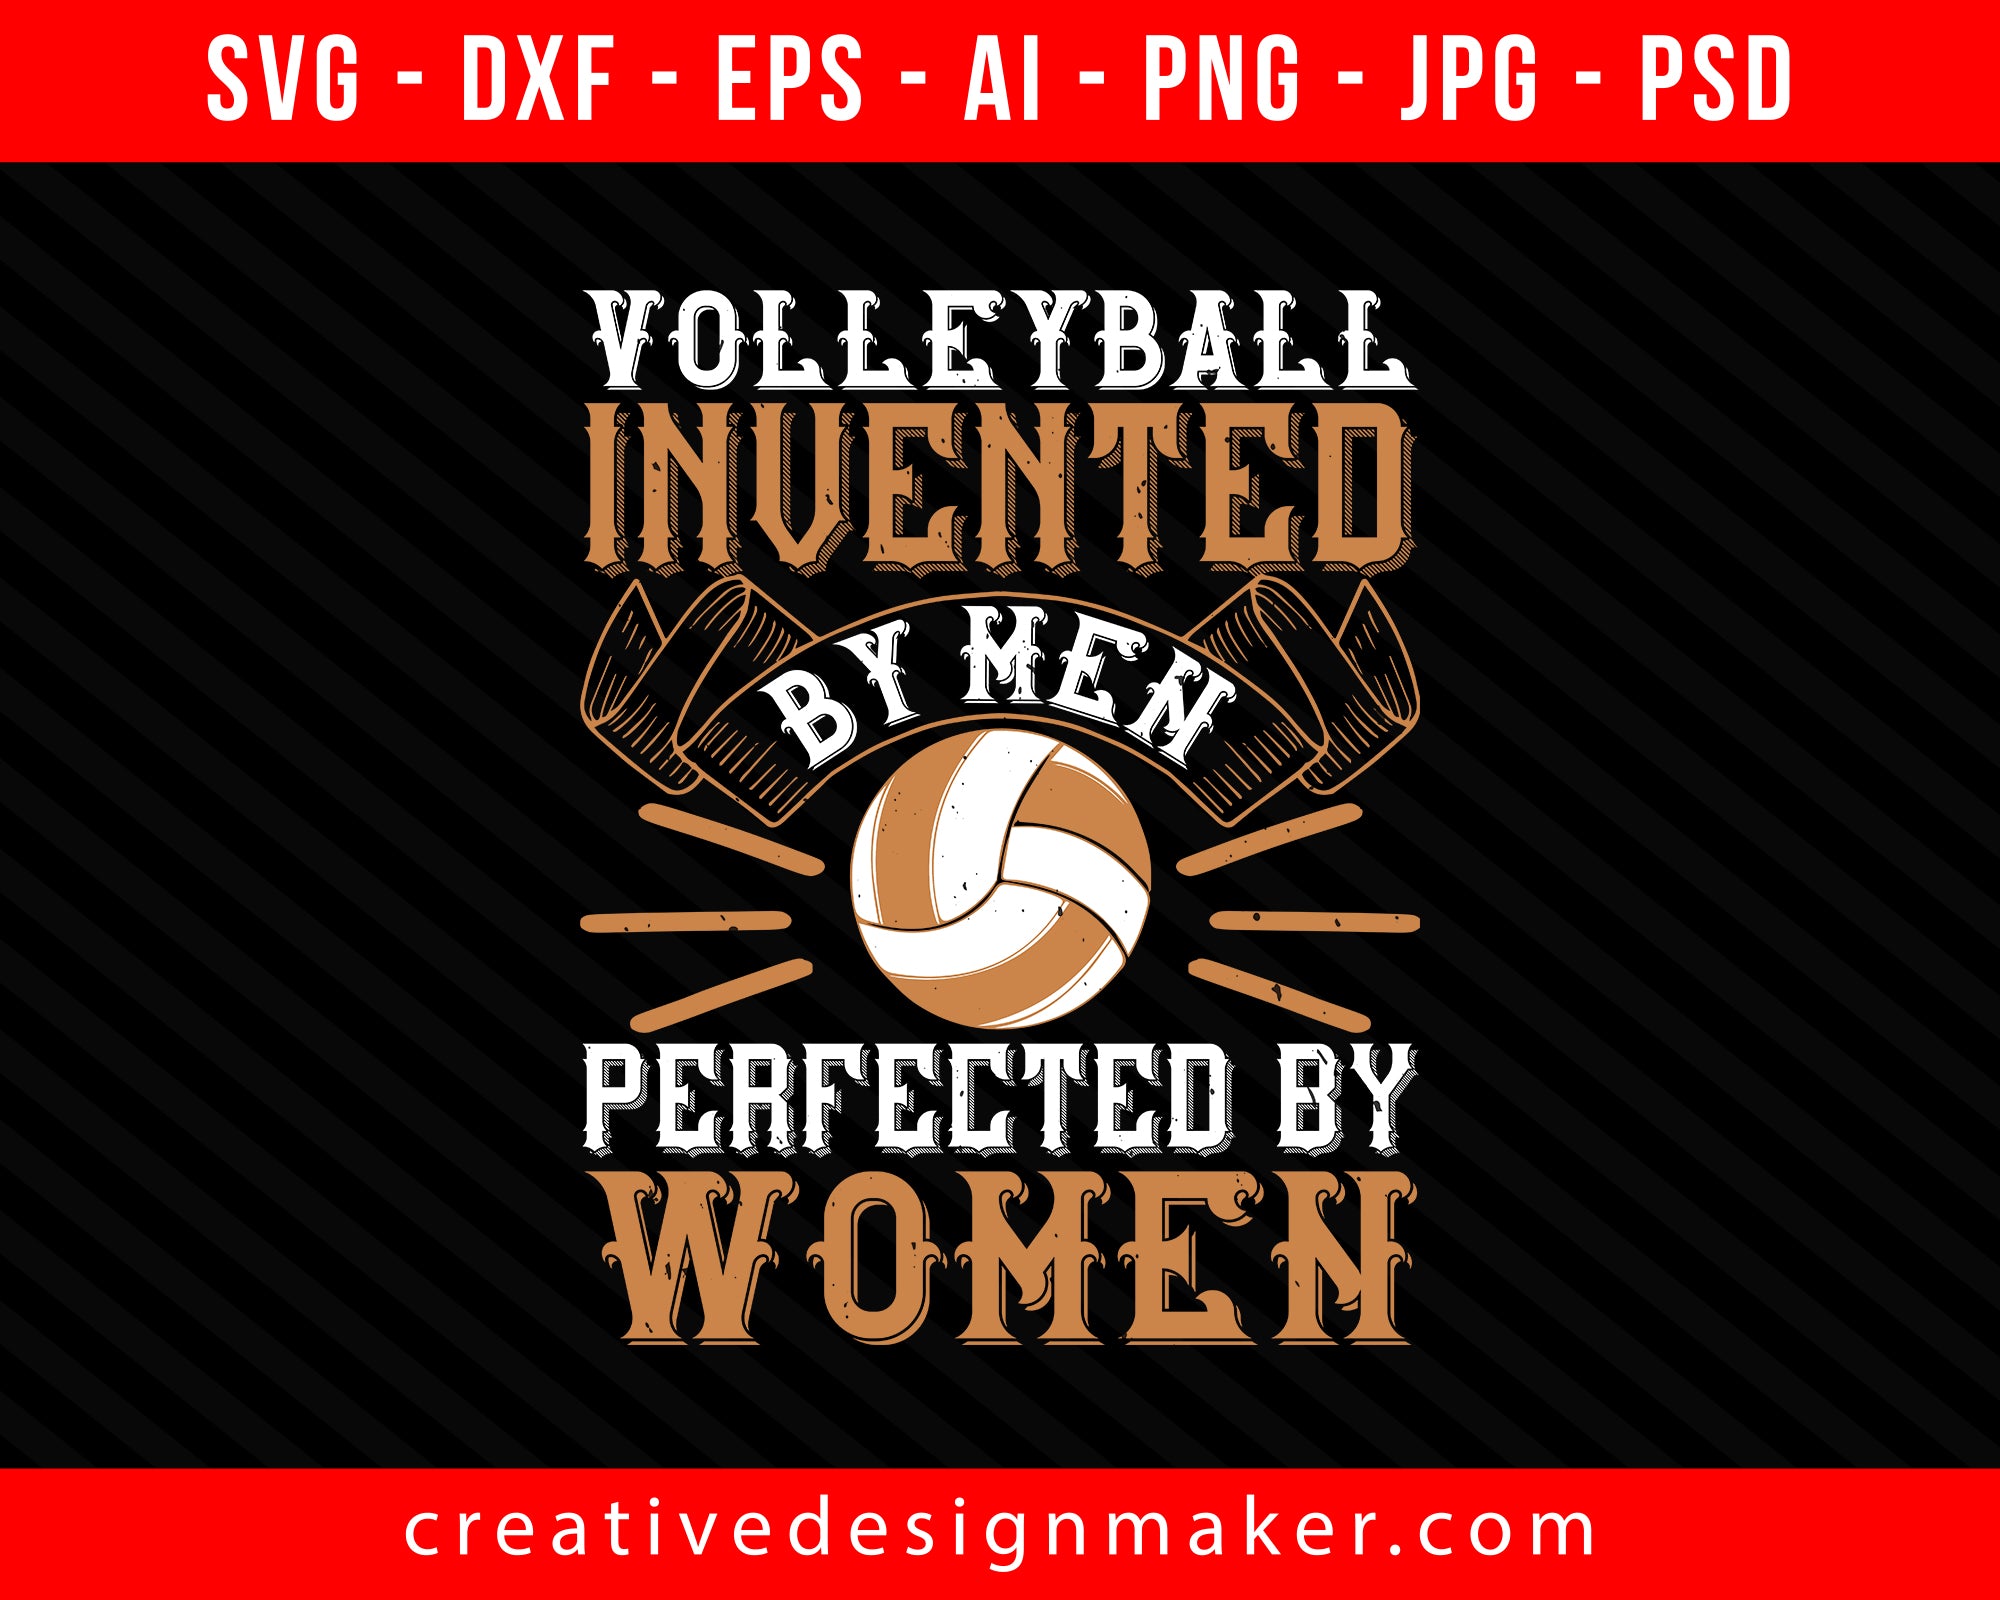 Volleyball Invented by men, perfected by women Print Ready Editable T-Shirt SVG Design!